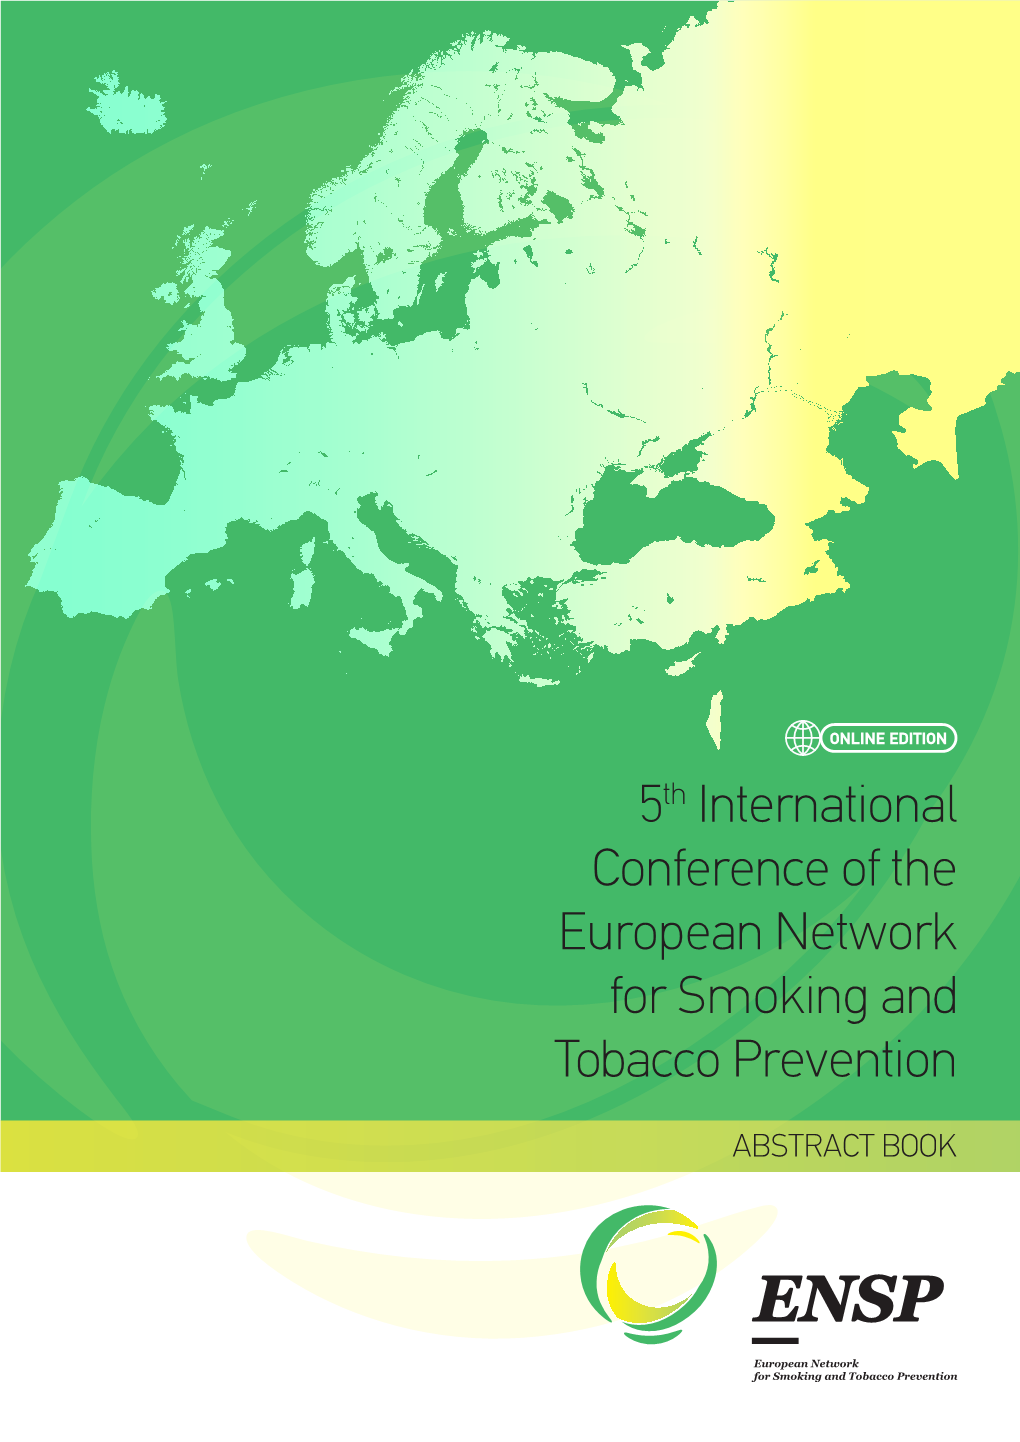 5Th International Conference of the European Network for Smoking and Tobacco Prevention